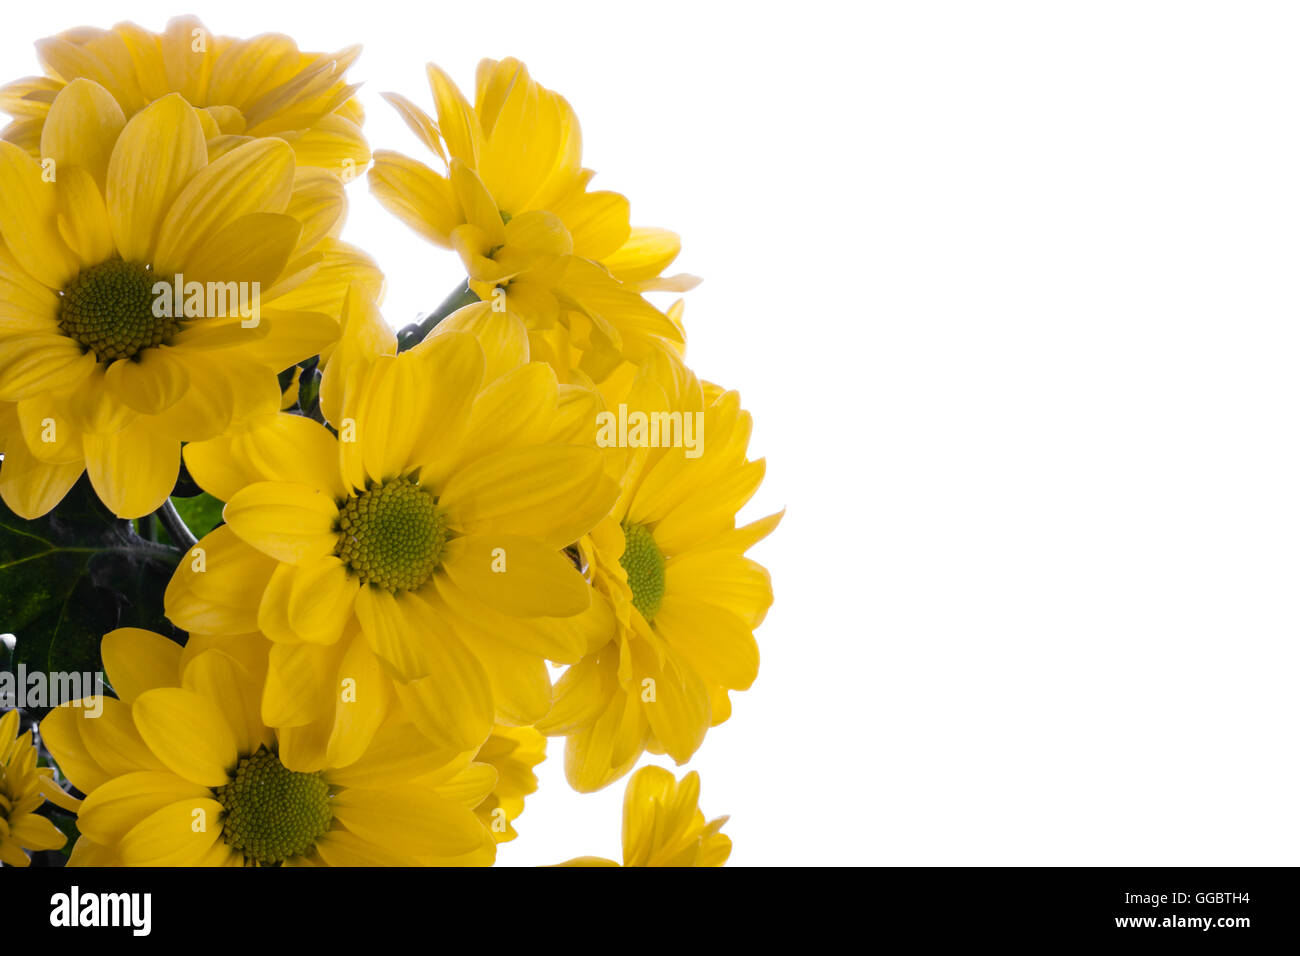 Yellow oxeye daisy flowers bouquet isolated on white Stock Photo